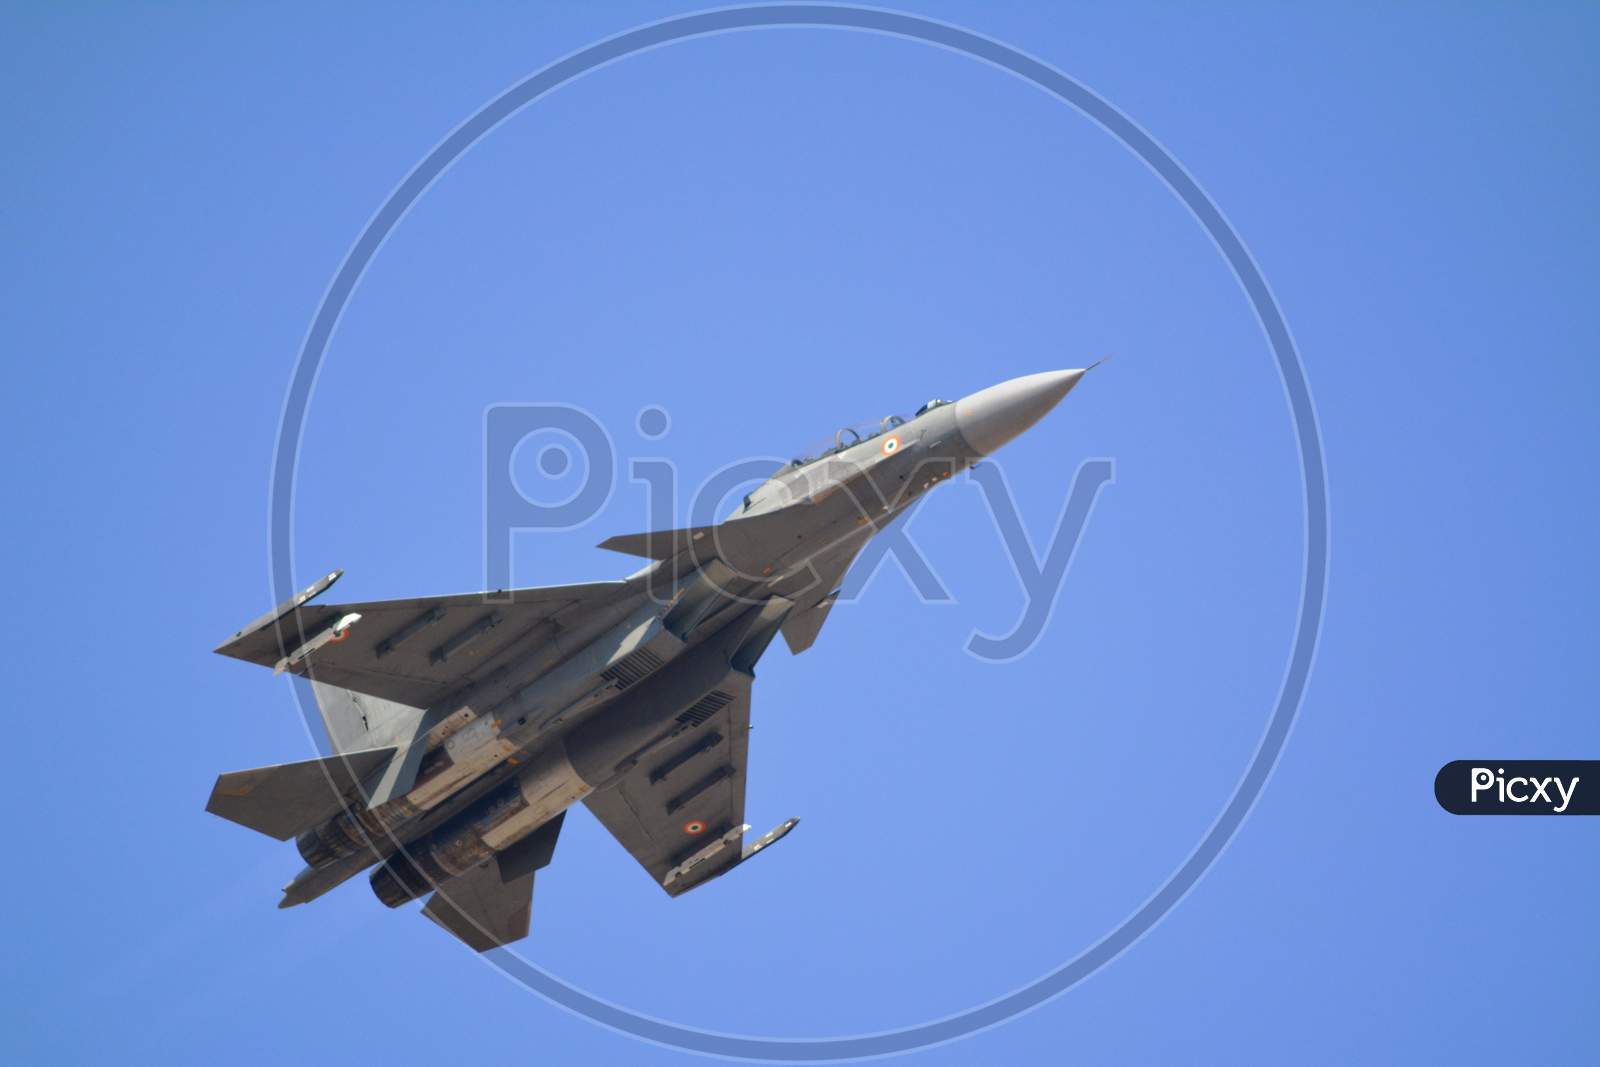 Sukhoi Su-30 in action during Air Show